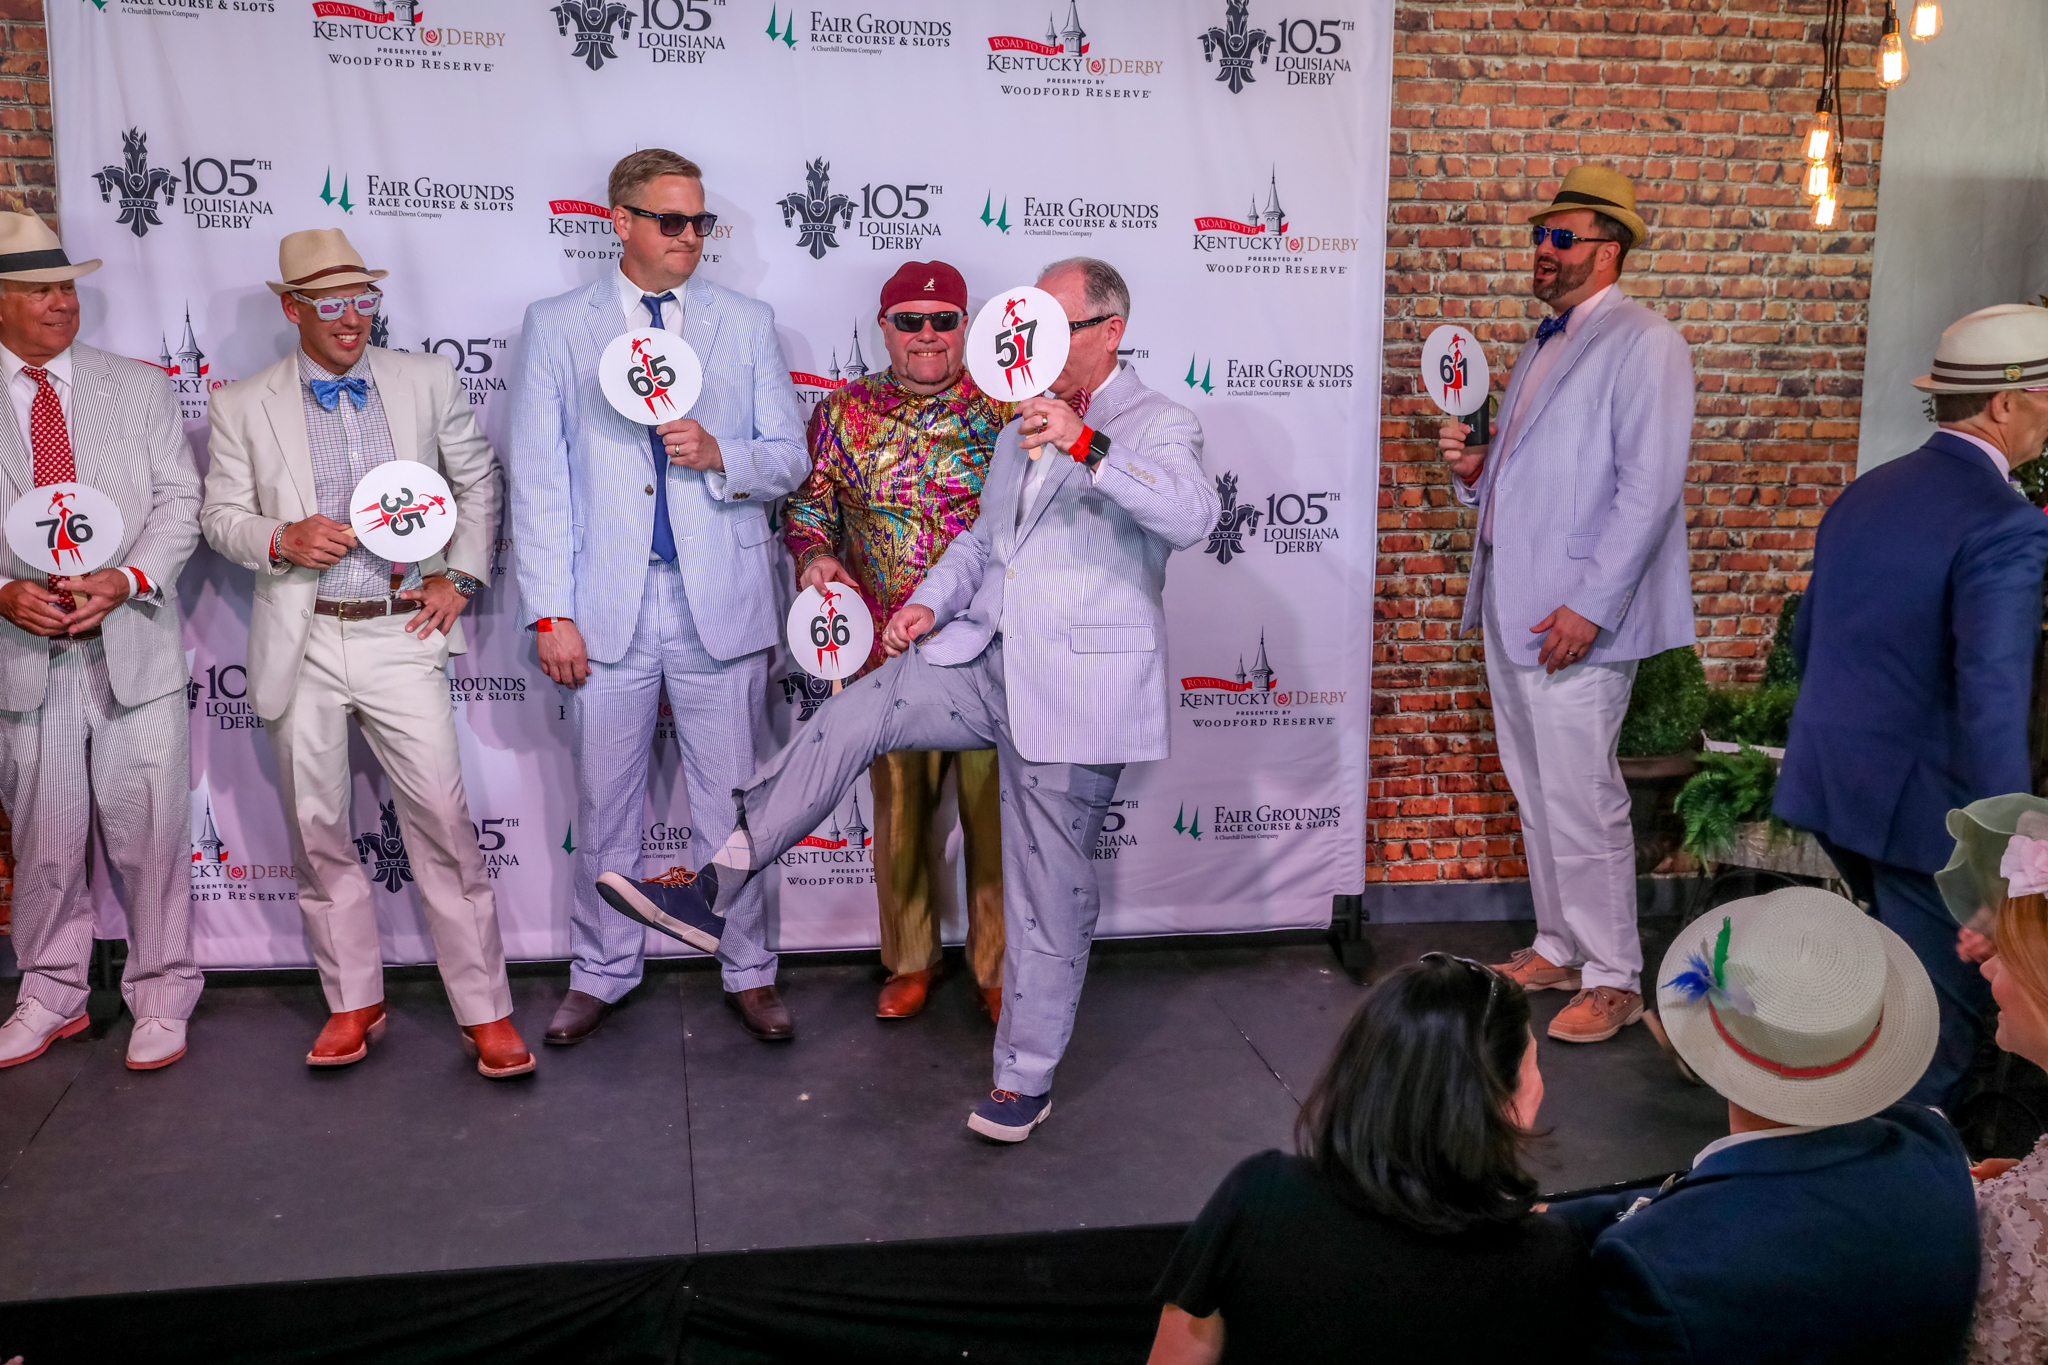 Fashion at the Races Louisiana Derby 2018 (33)